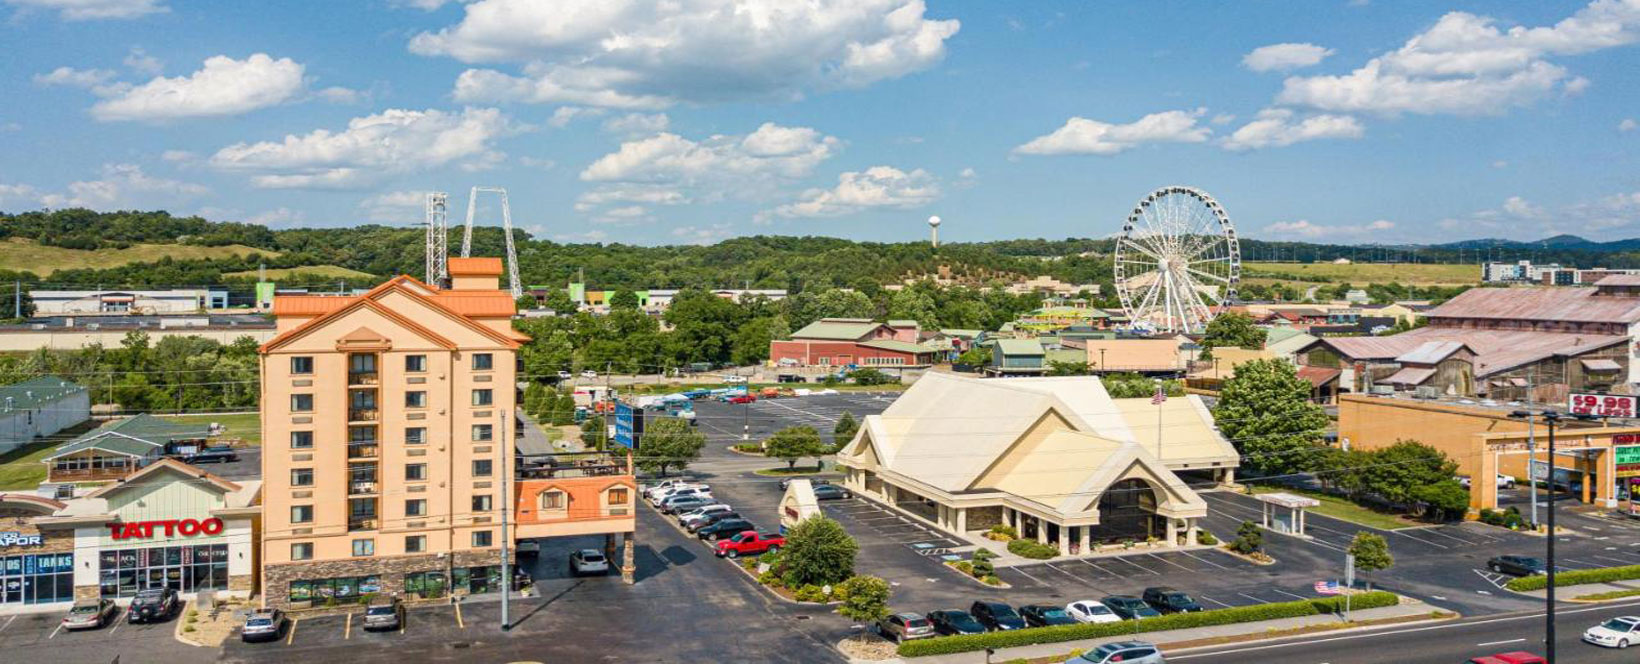 Mountain Vista & Suites Pigeon Forge TN | Hotel near The Great Smoky  Mountains